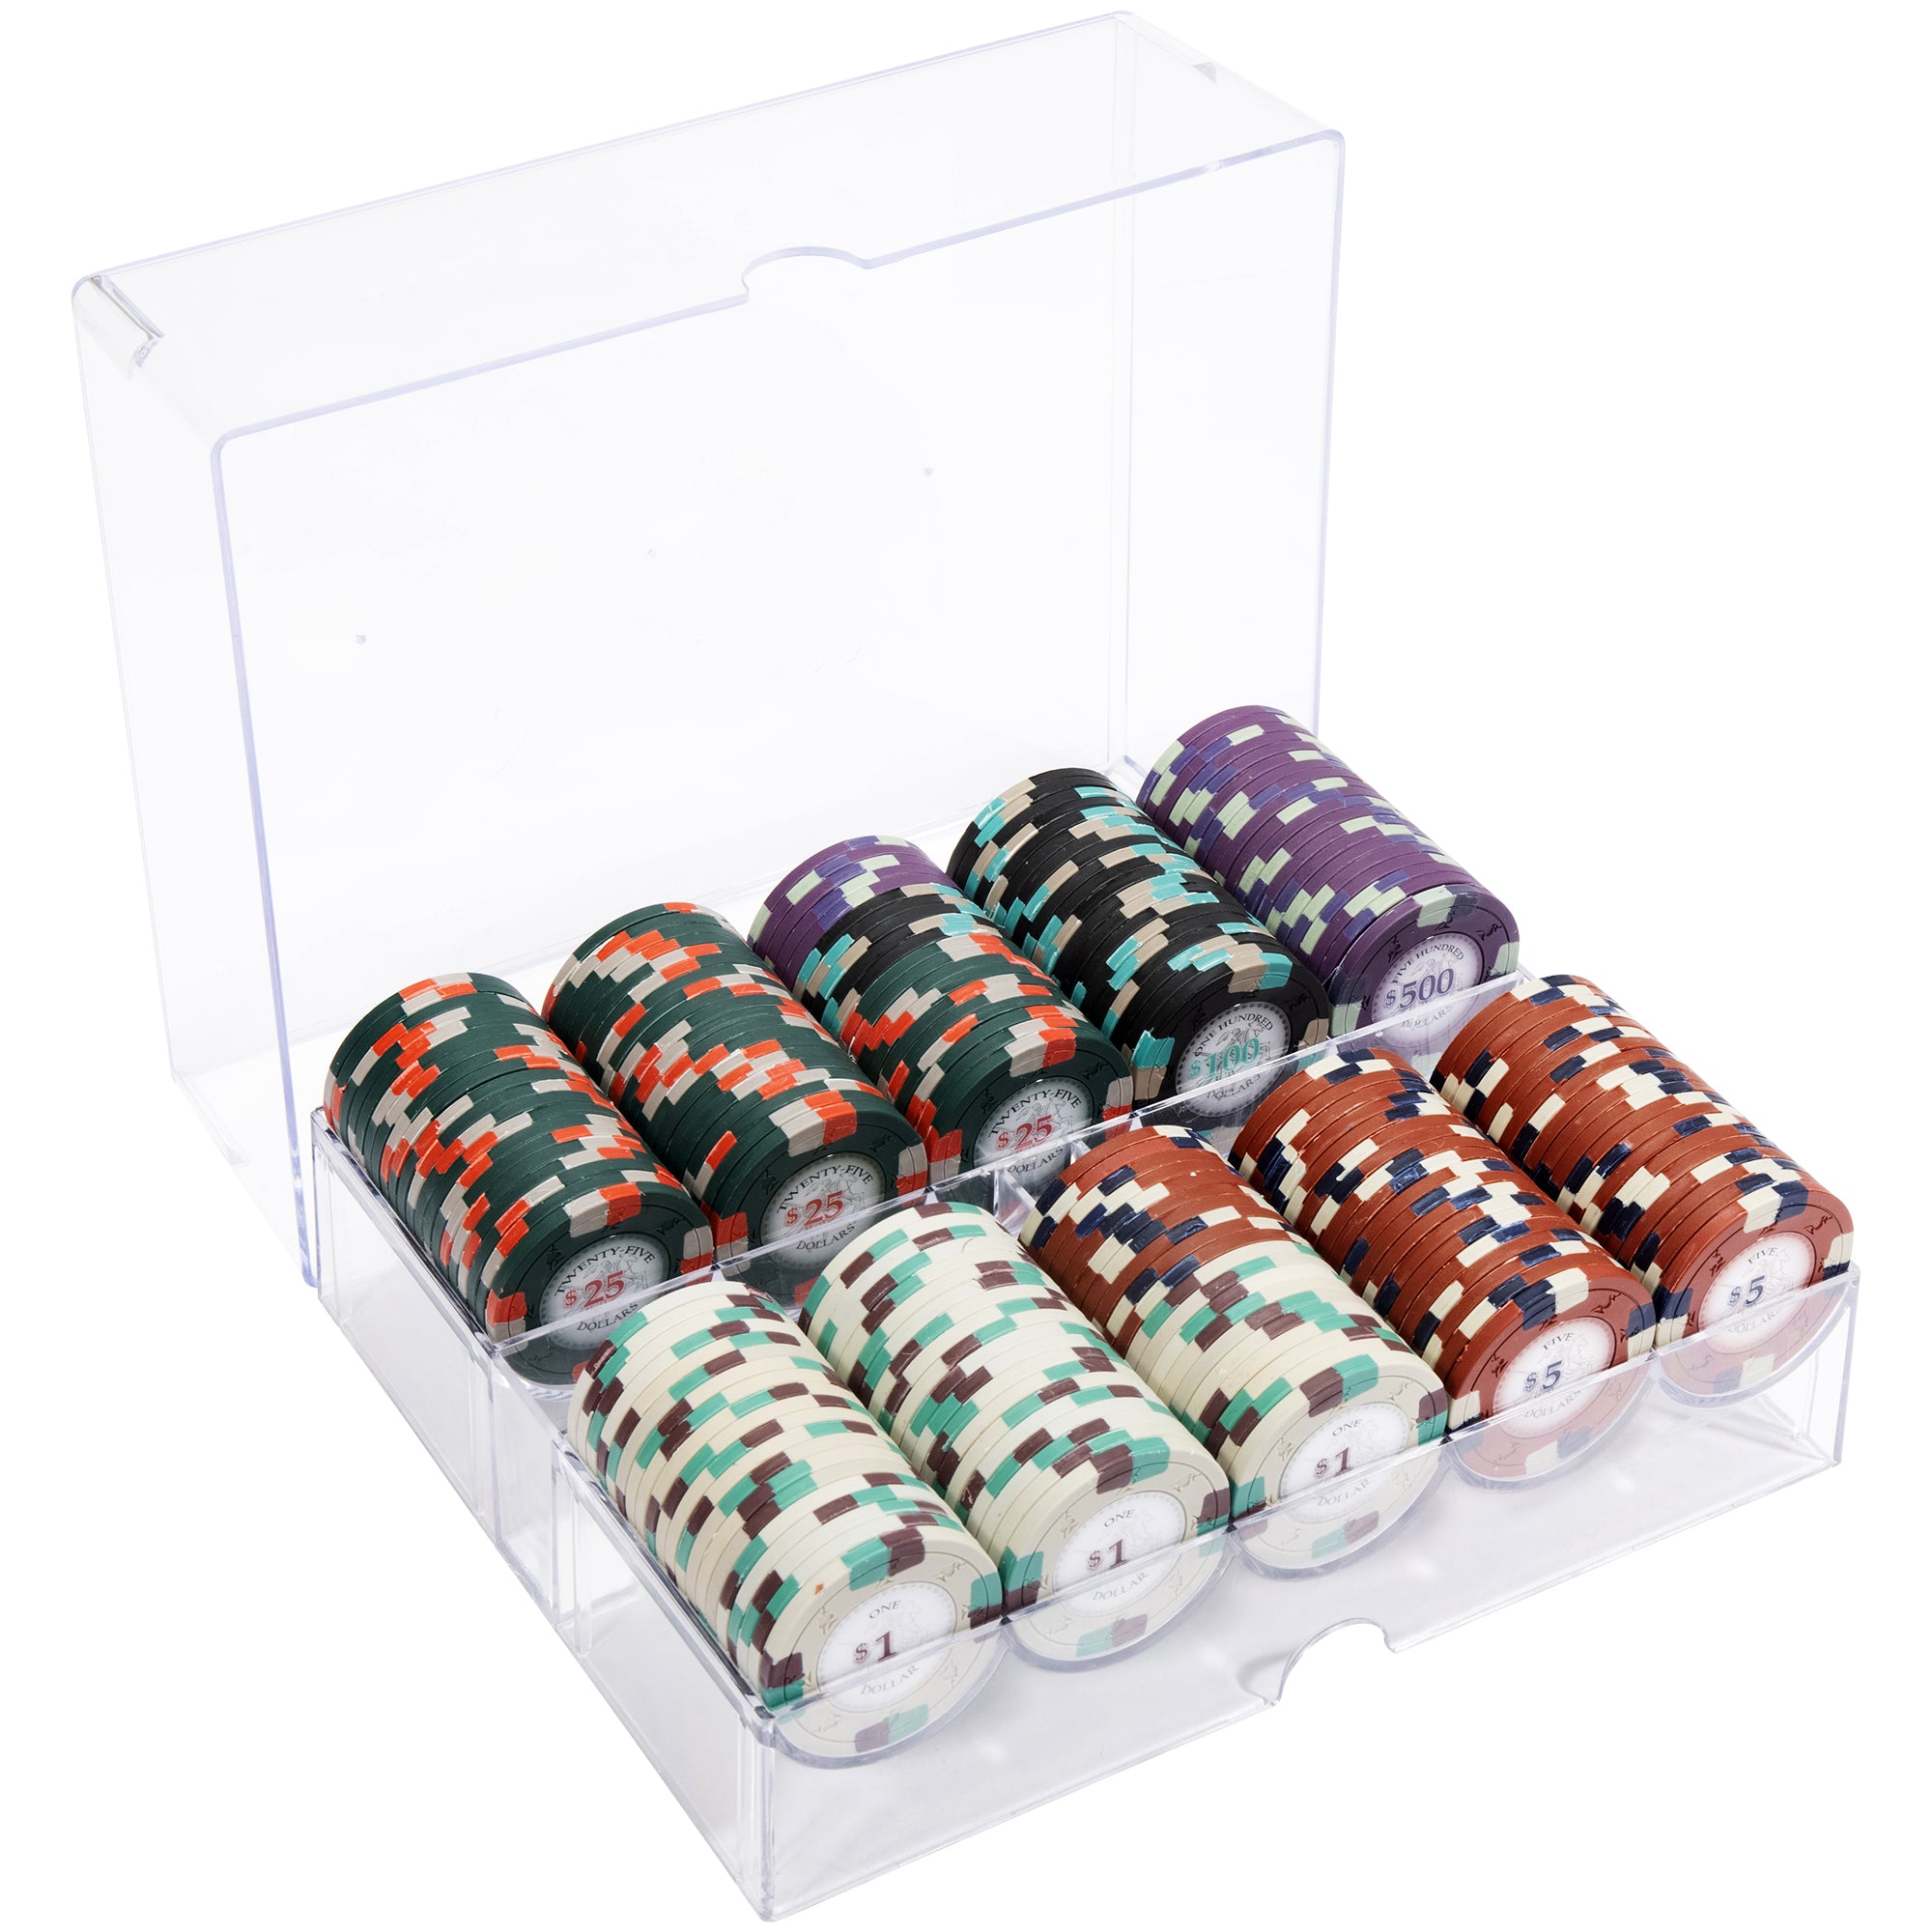 Poker Knights 13.5-gram Poker Chip Set in Acrylic Tray (200 Count) - Clay Composite